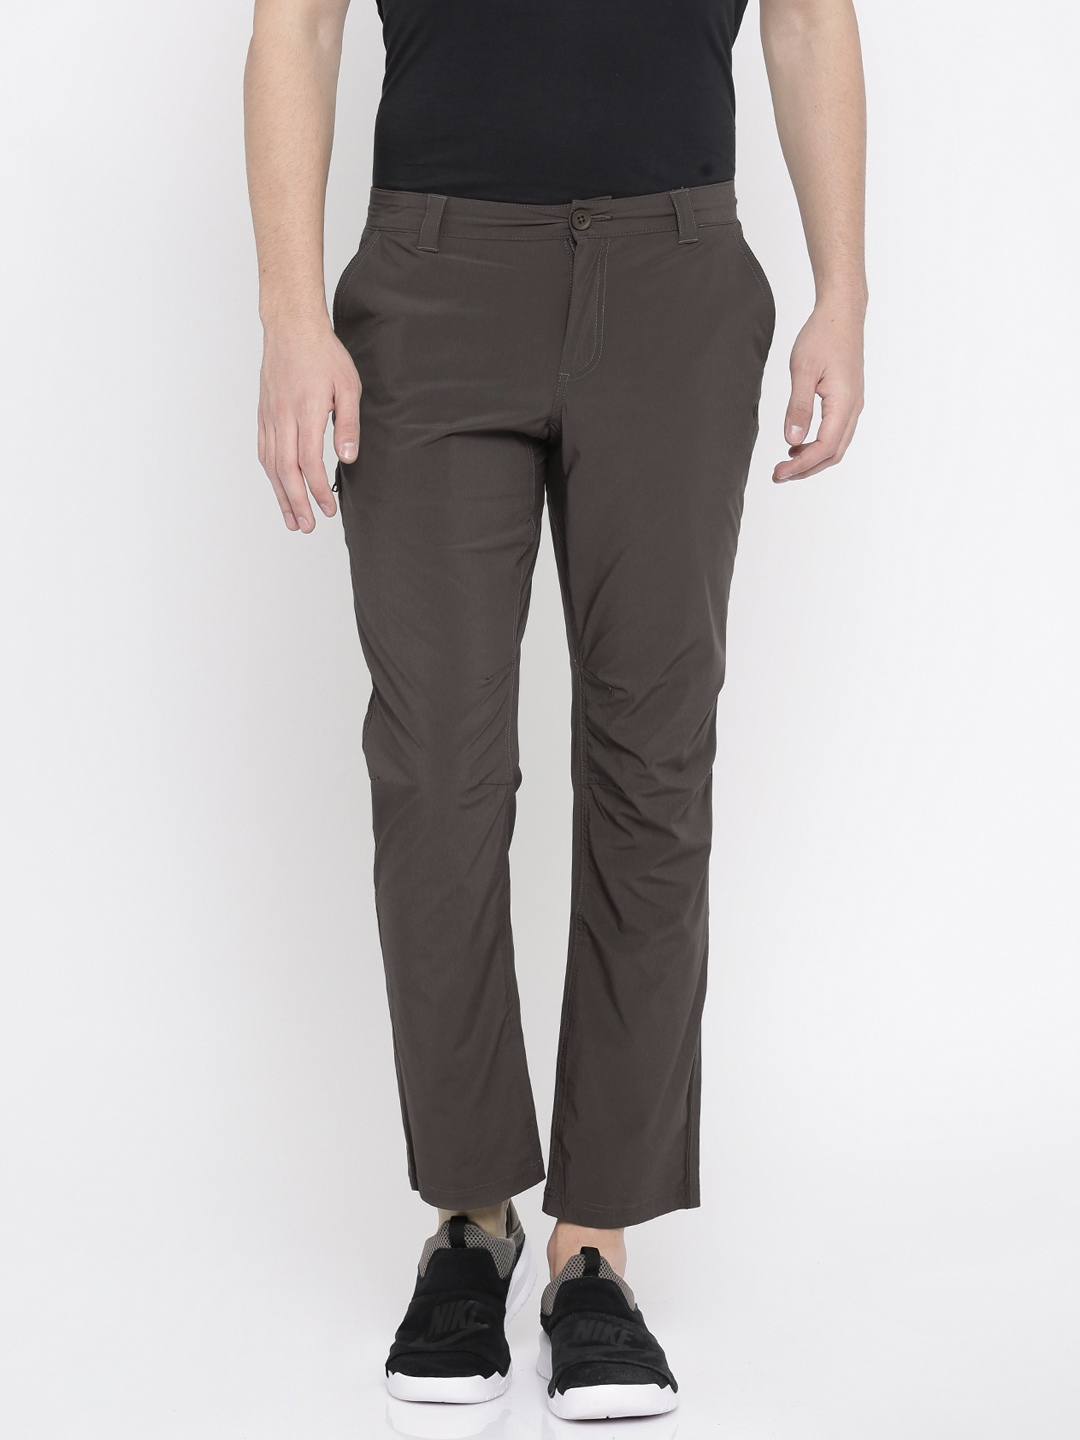 Wildcraft Forest Night Hiking Mens Pant  Online